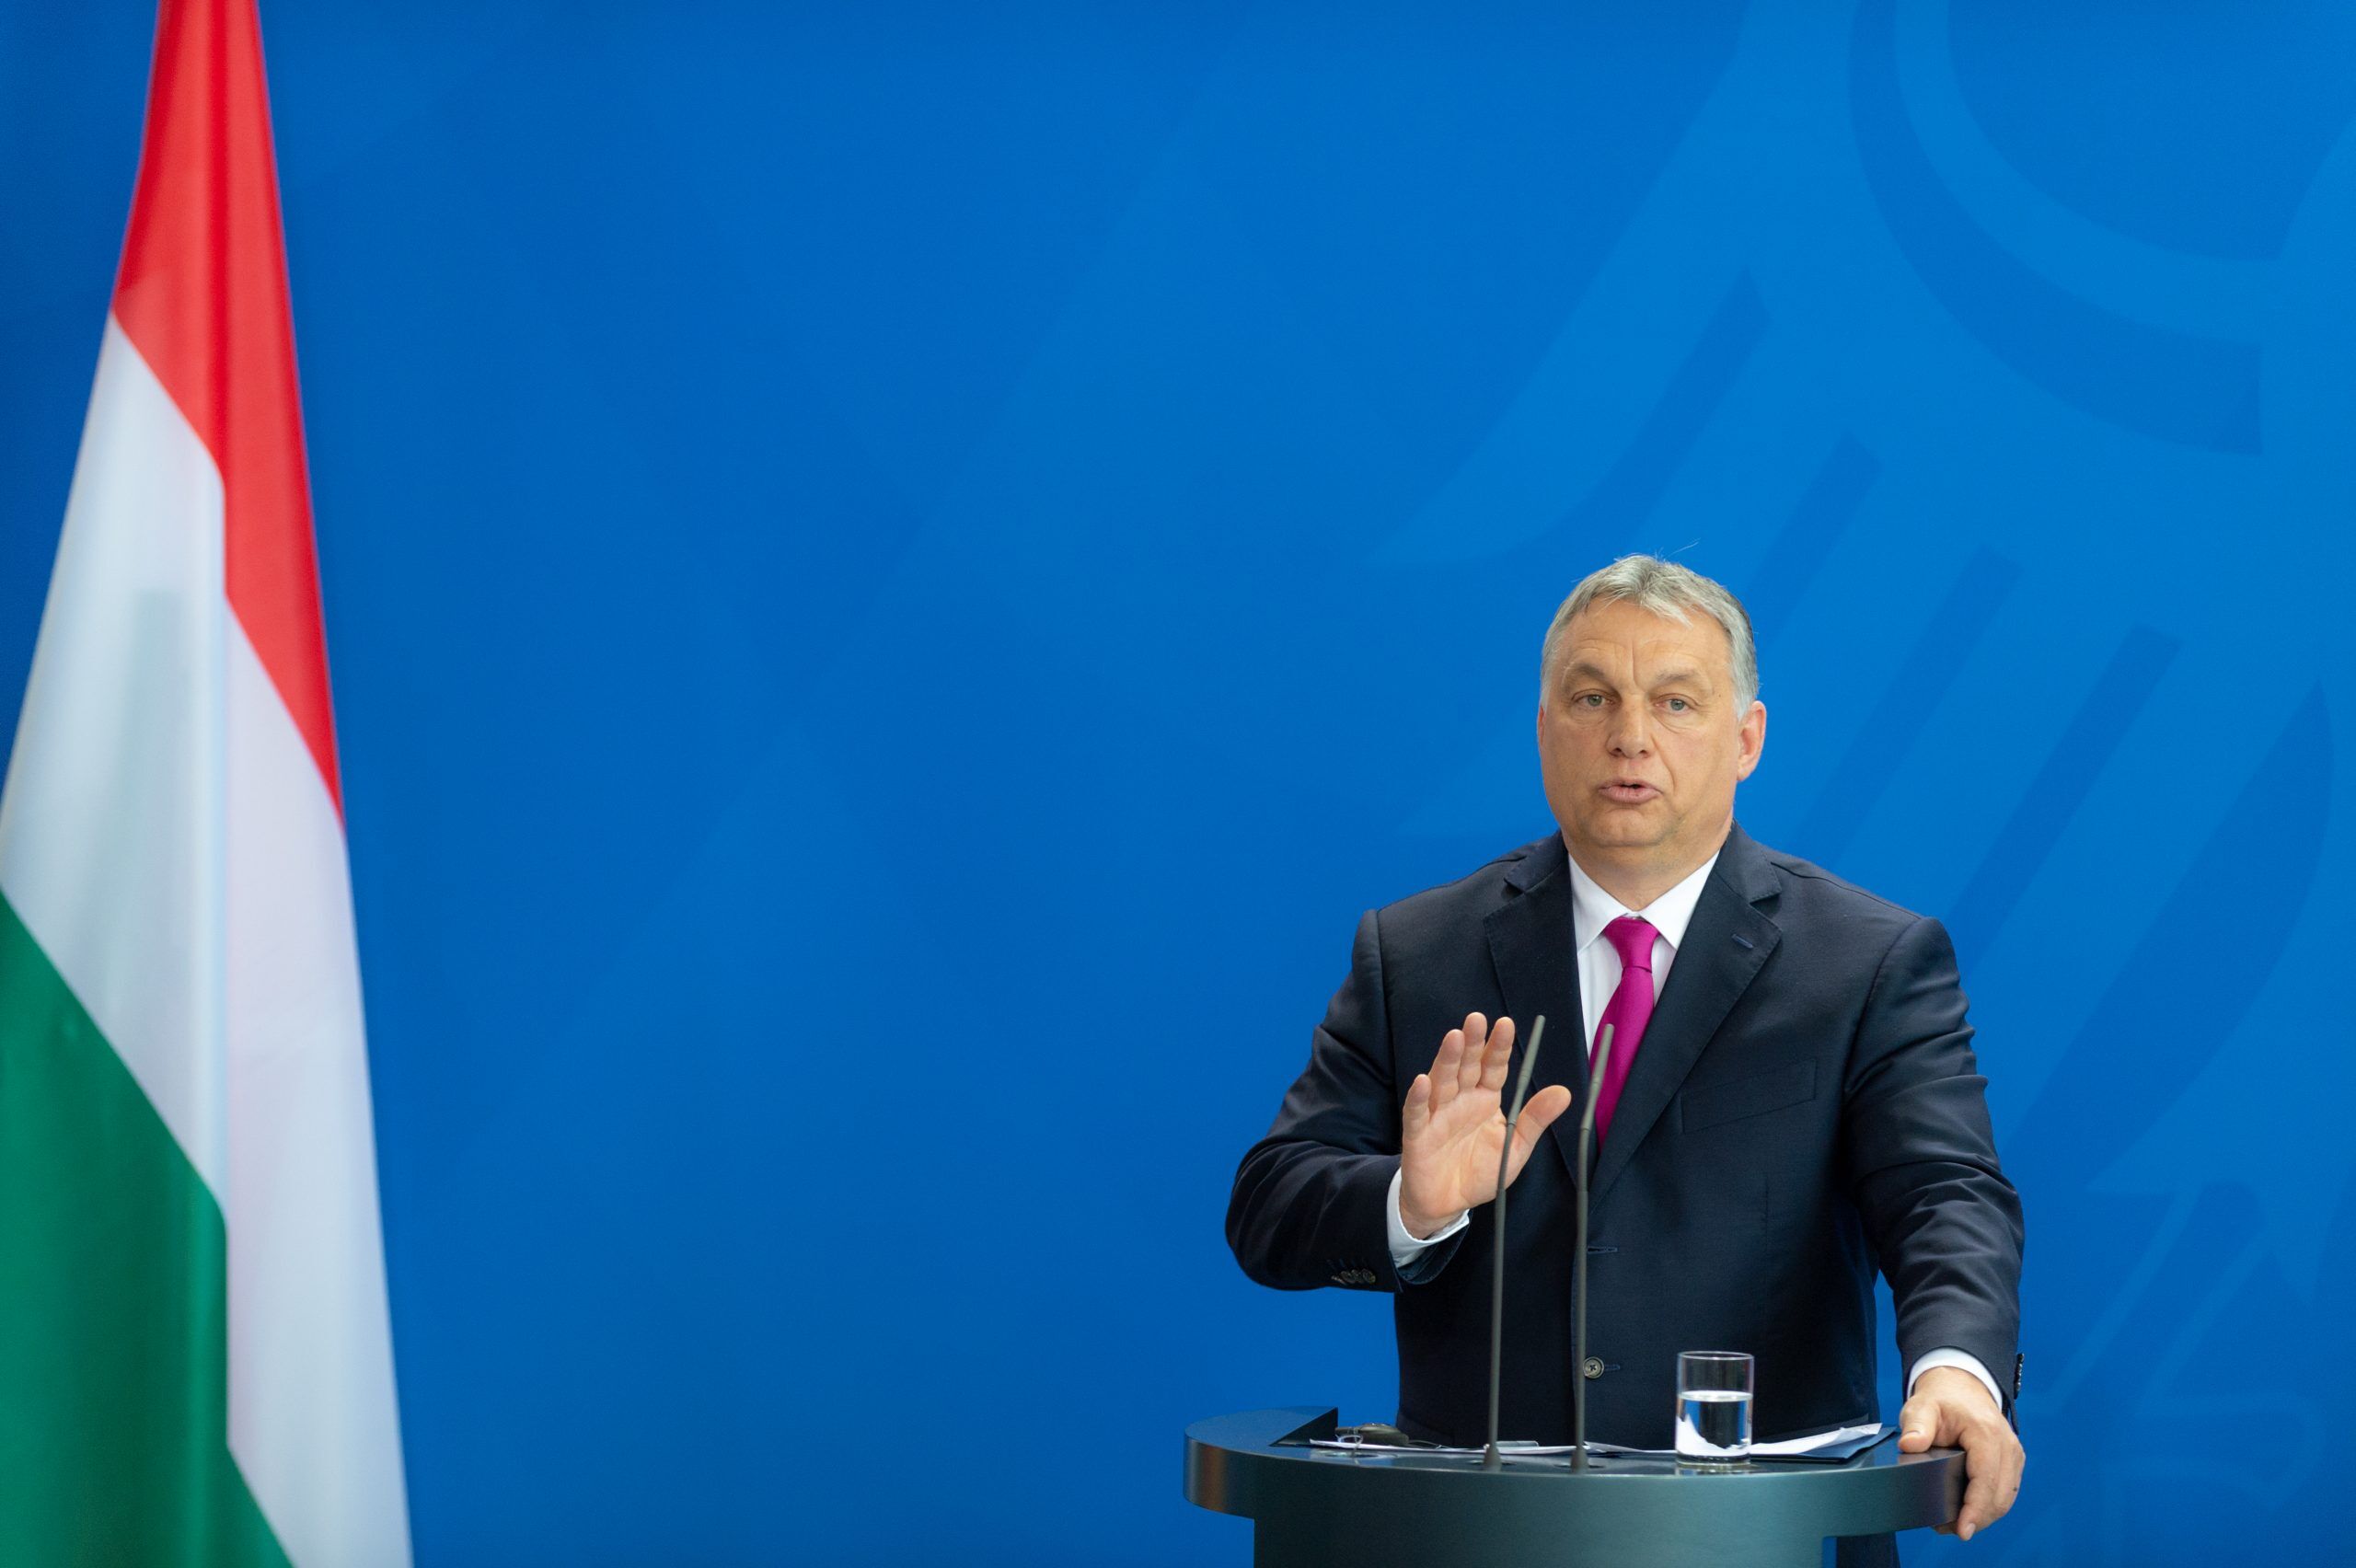 2018-07-05: Viktor Orbán, the Prime Minister of Hungary, answers questions at the press conference at the federal chancellery in Berlin